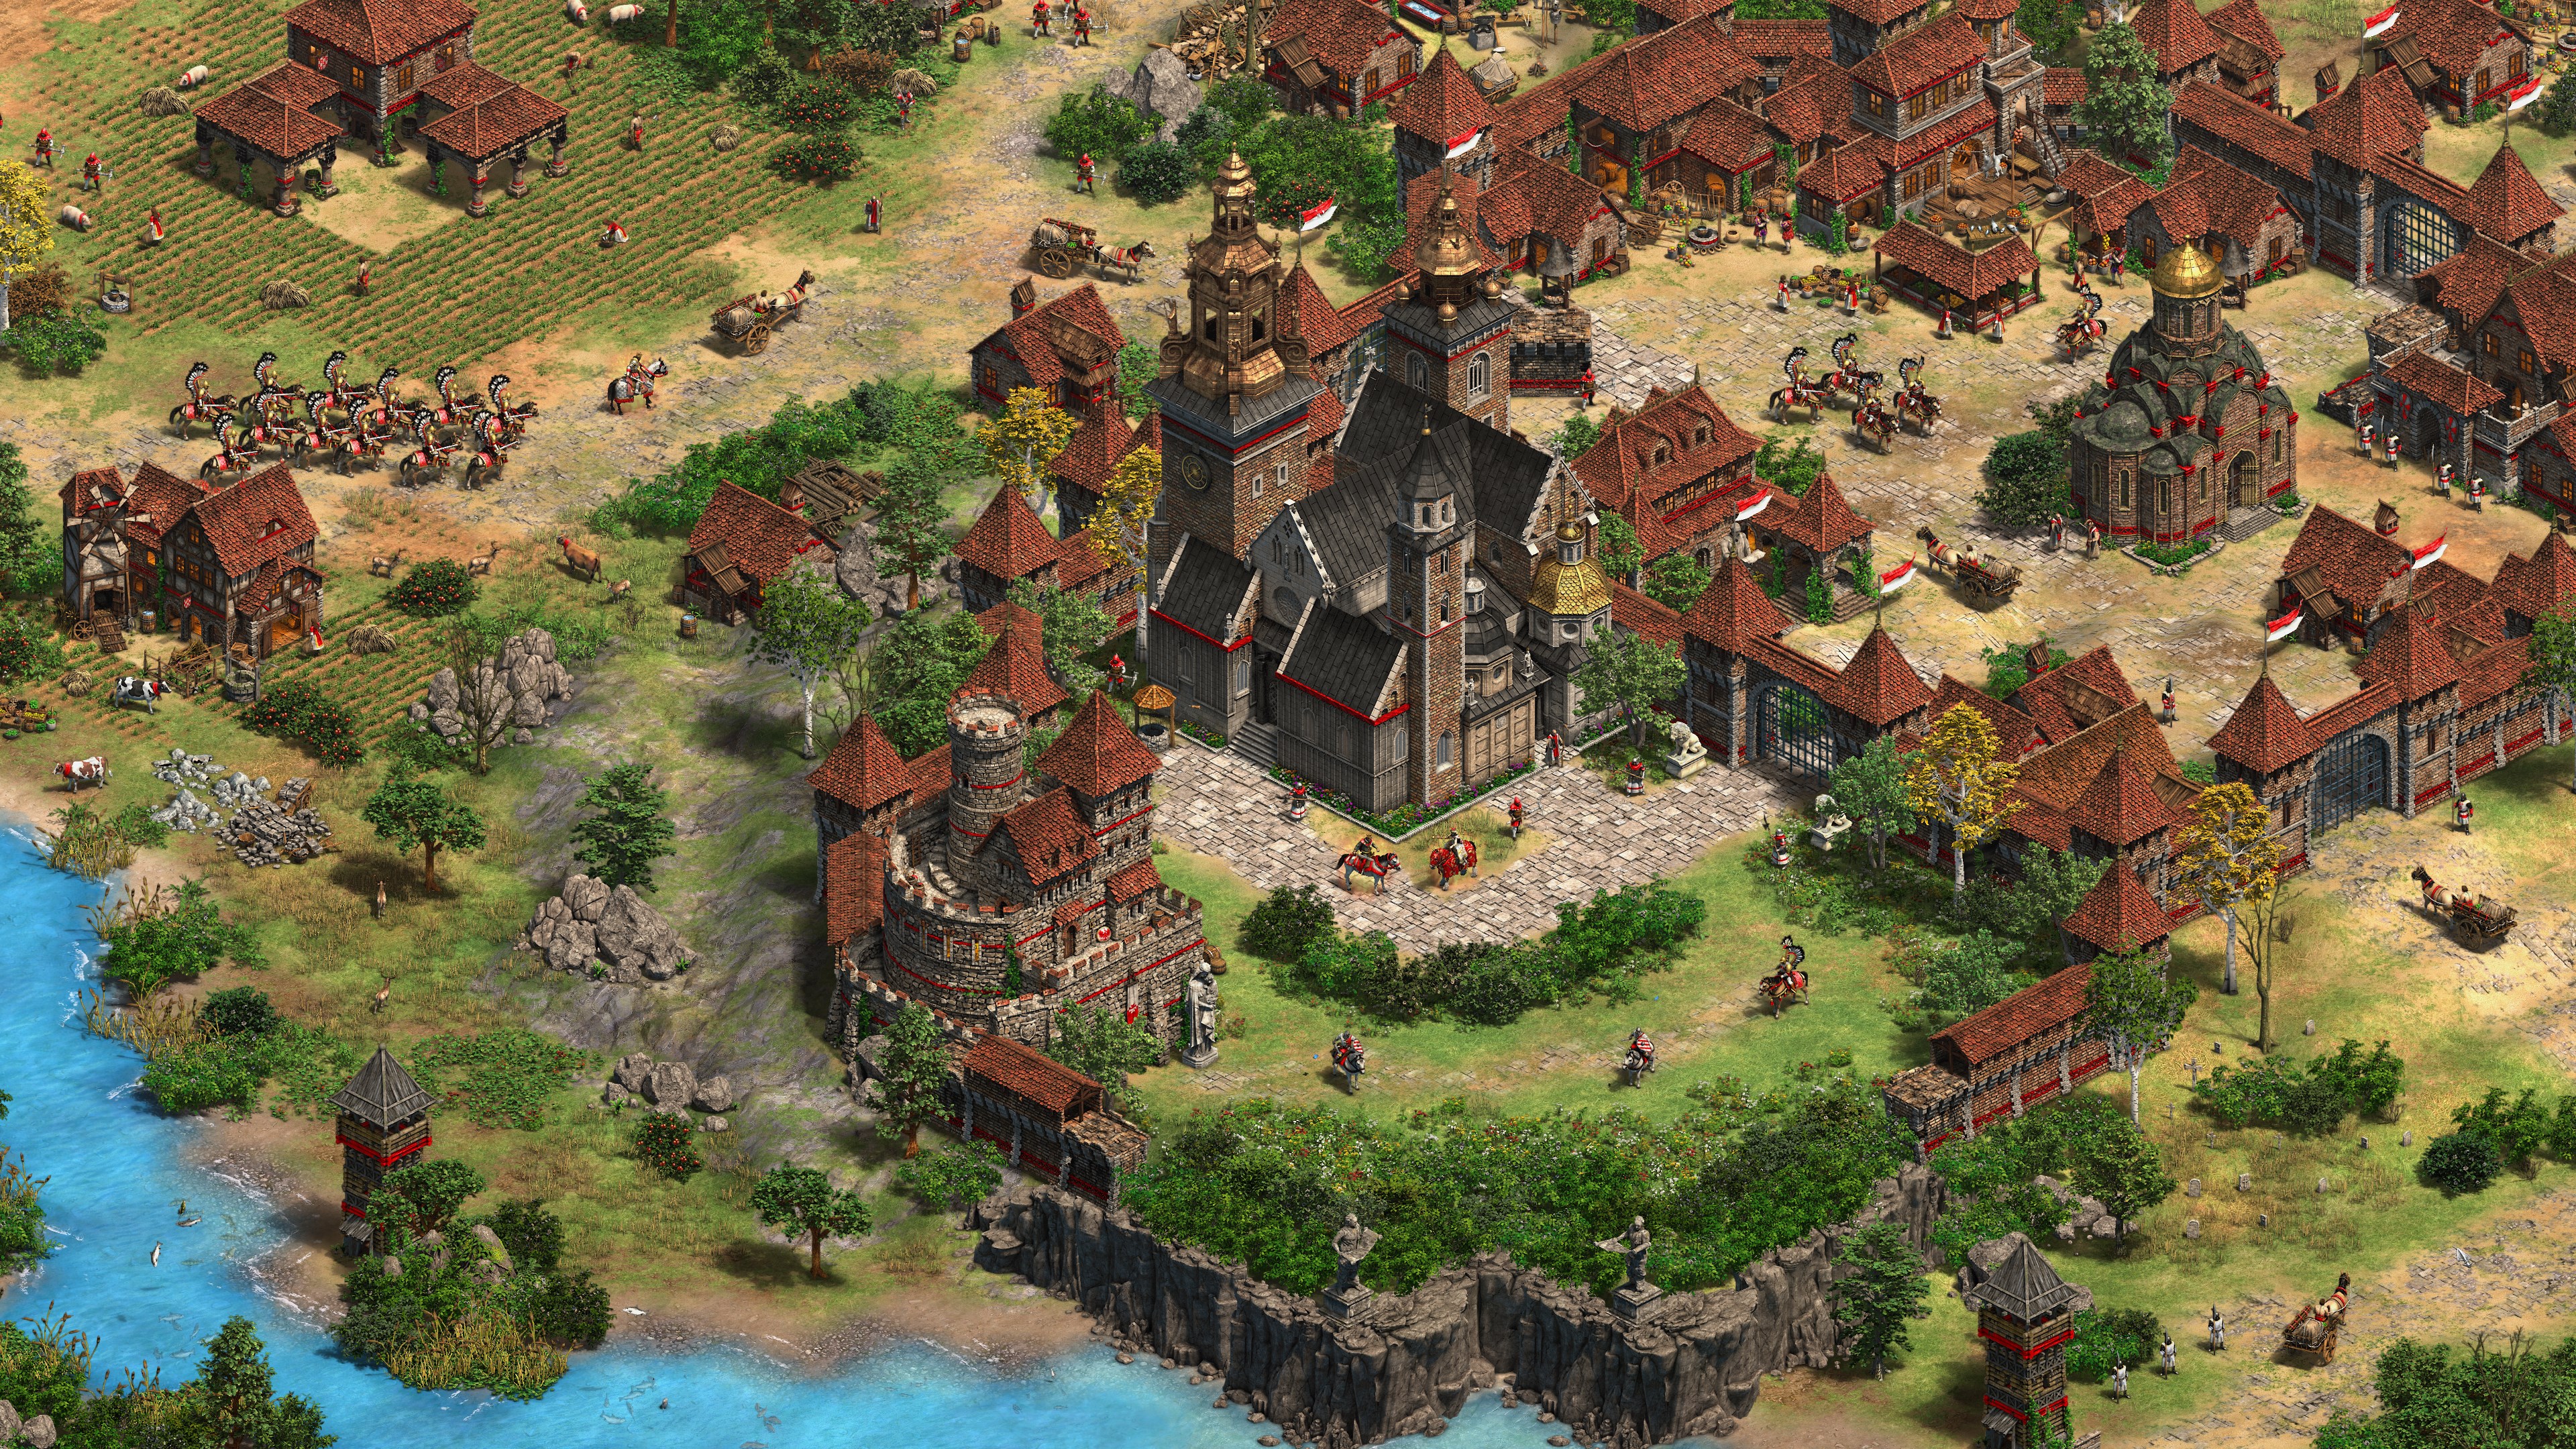 Age of Empires II: Definitive Edition - Dawn of the Dukes screenshot 52470